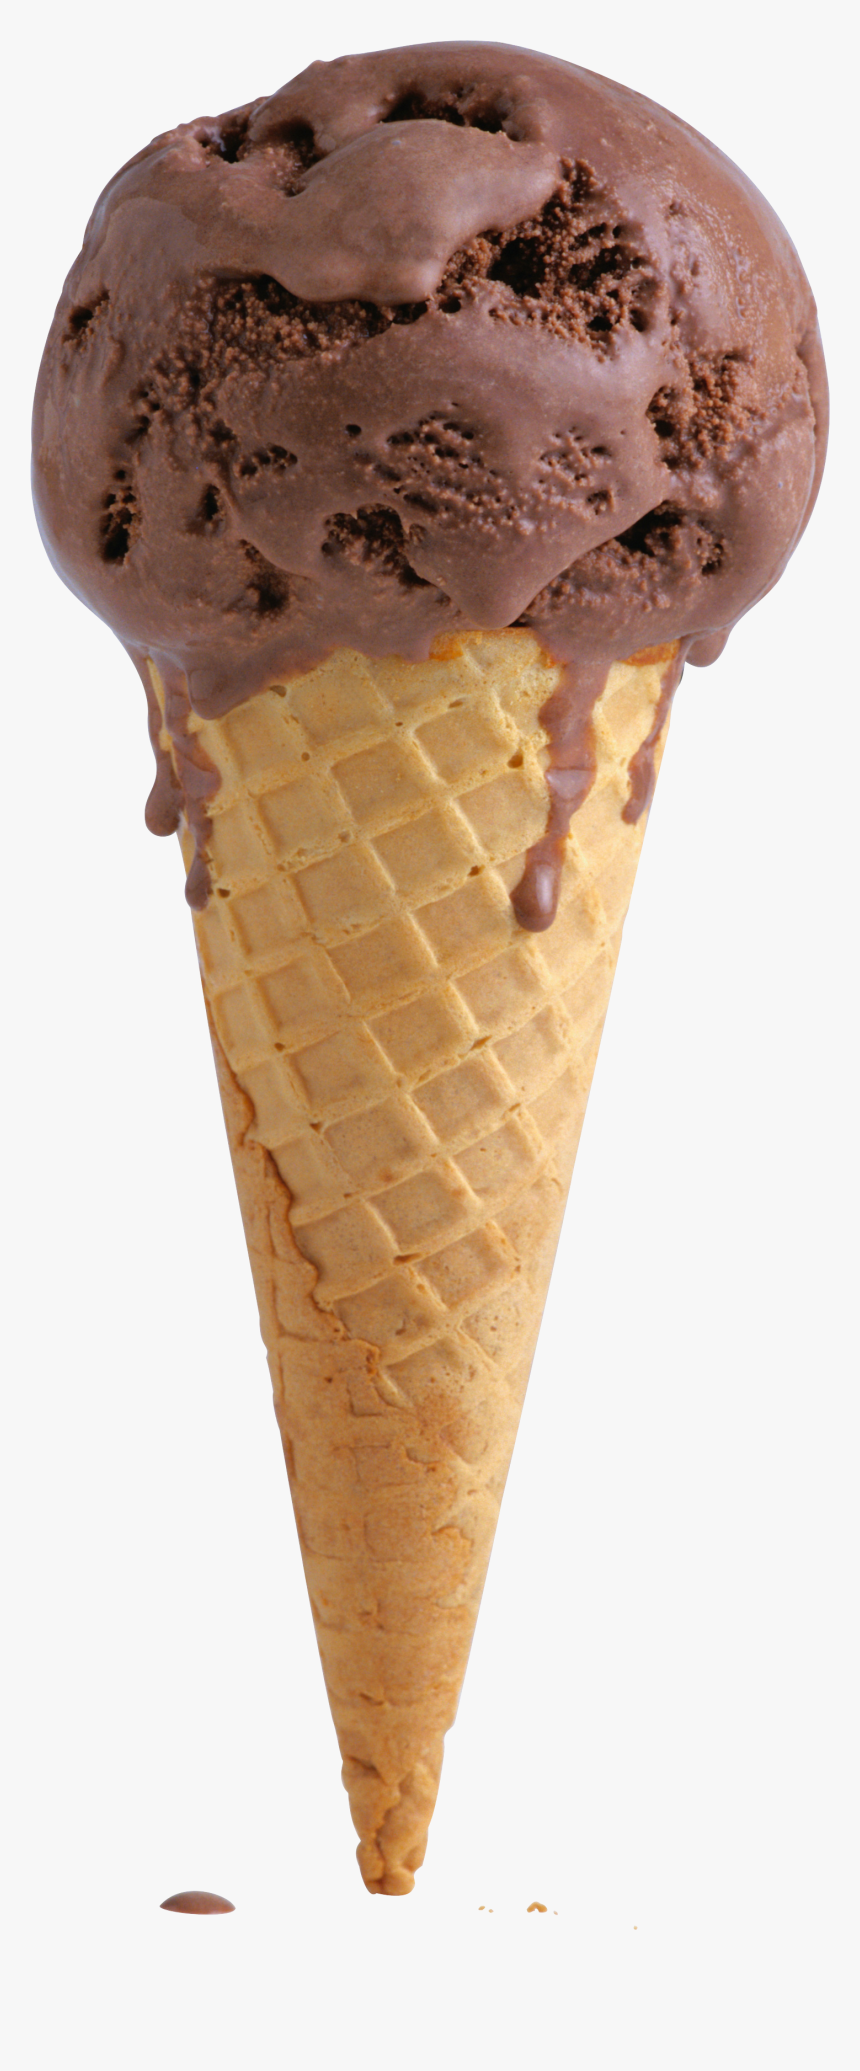 Grab And Download Ice Cream Png Picture - Transparent Background Ice Cream Cone Png, Png Download, Free Download